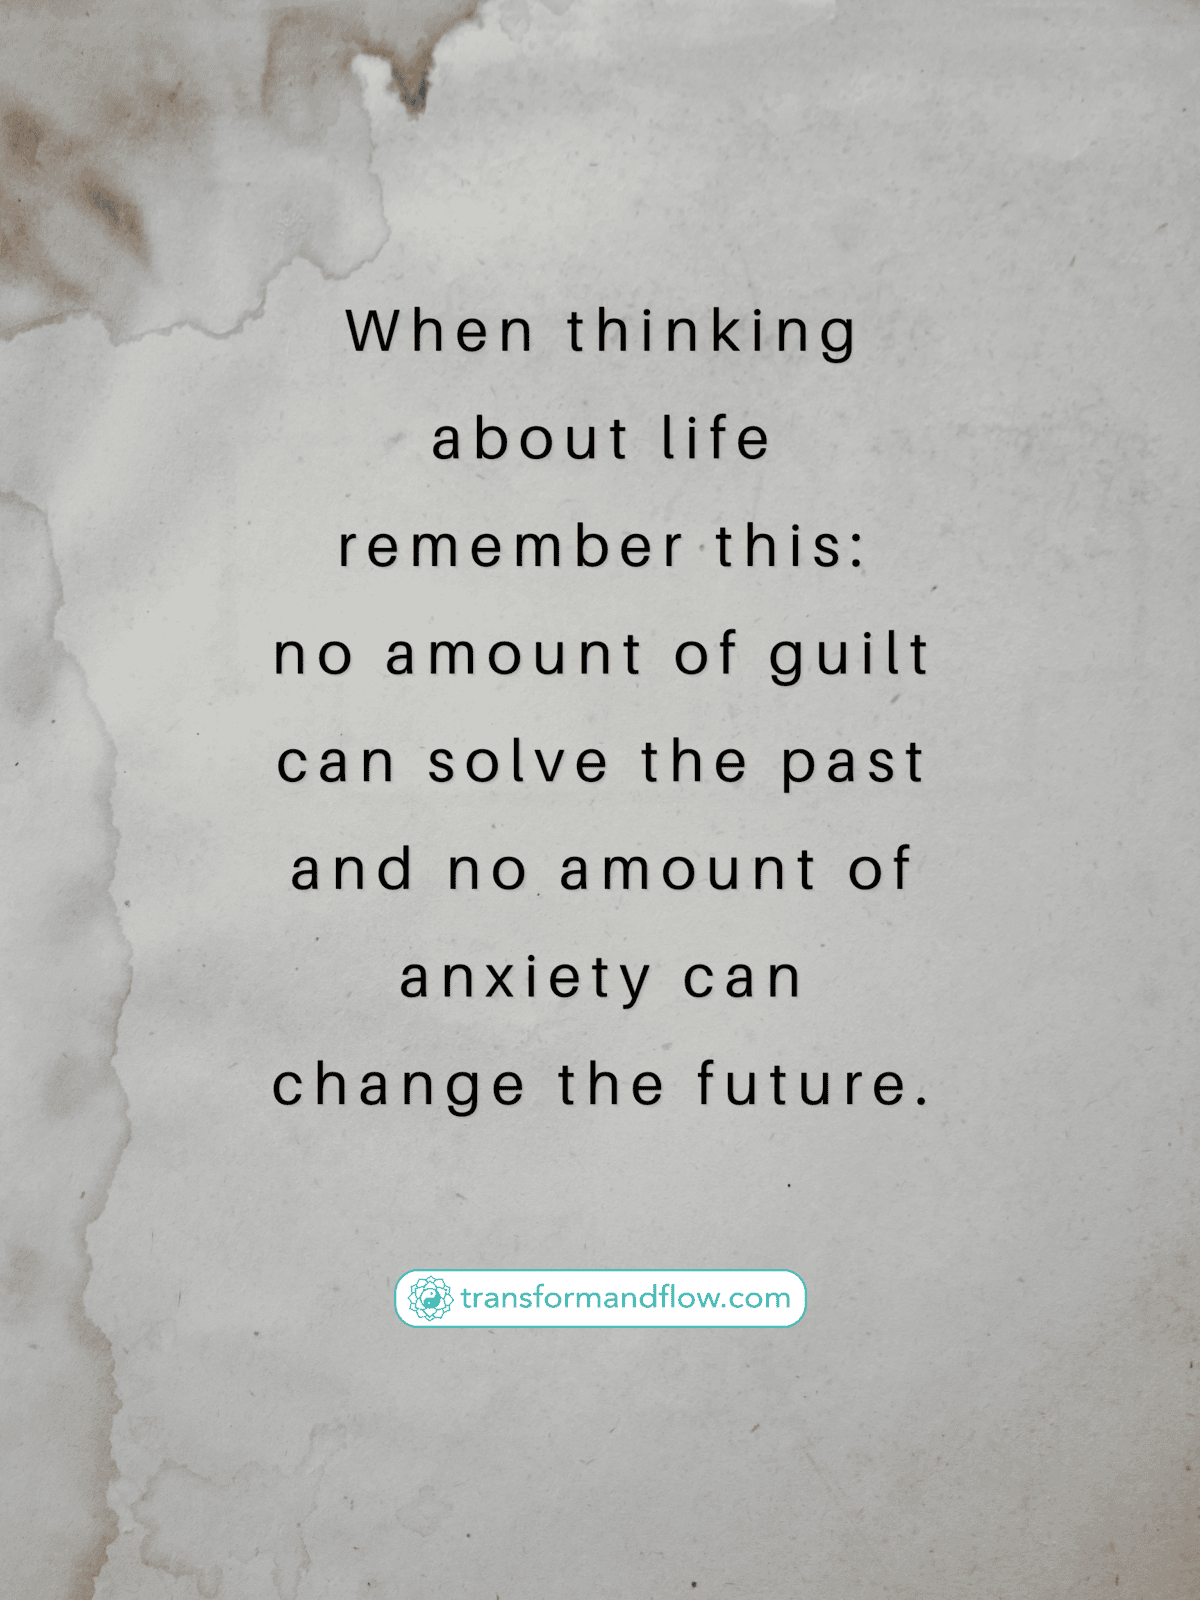 No Amount of Guilt or Anxiety Helps!